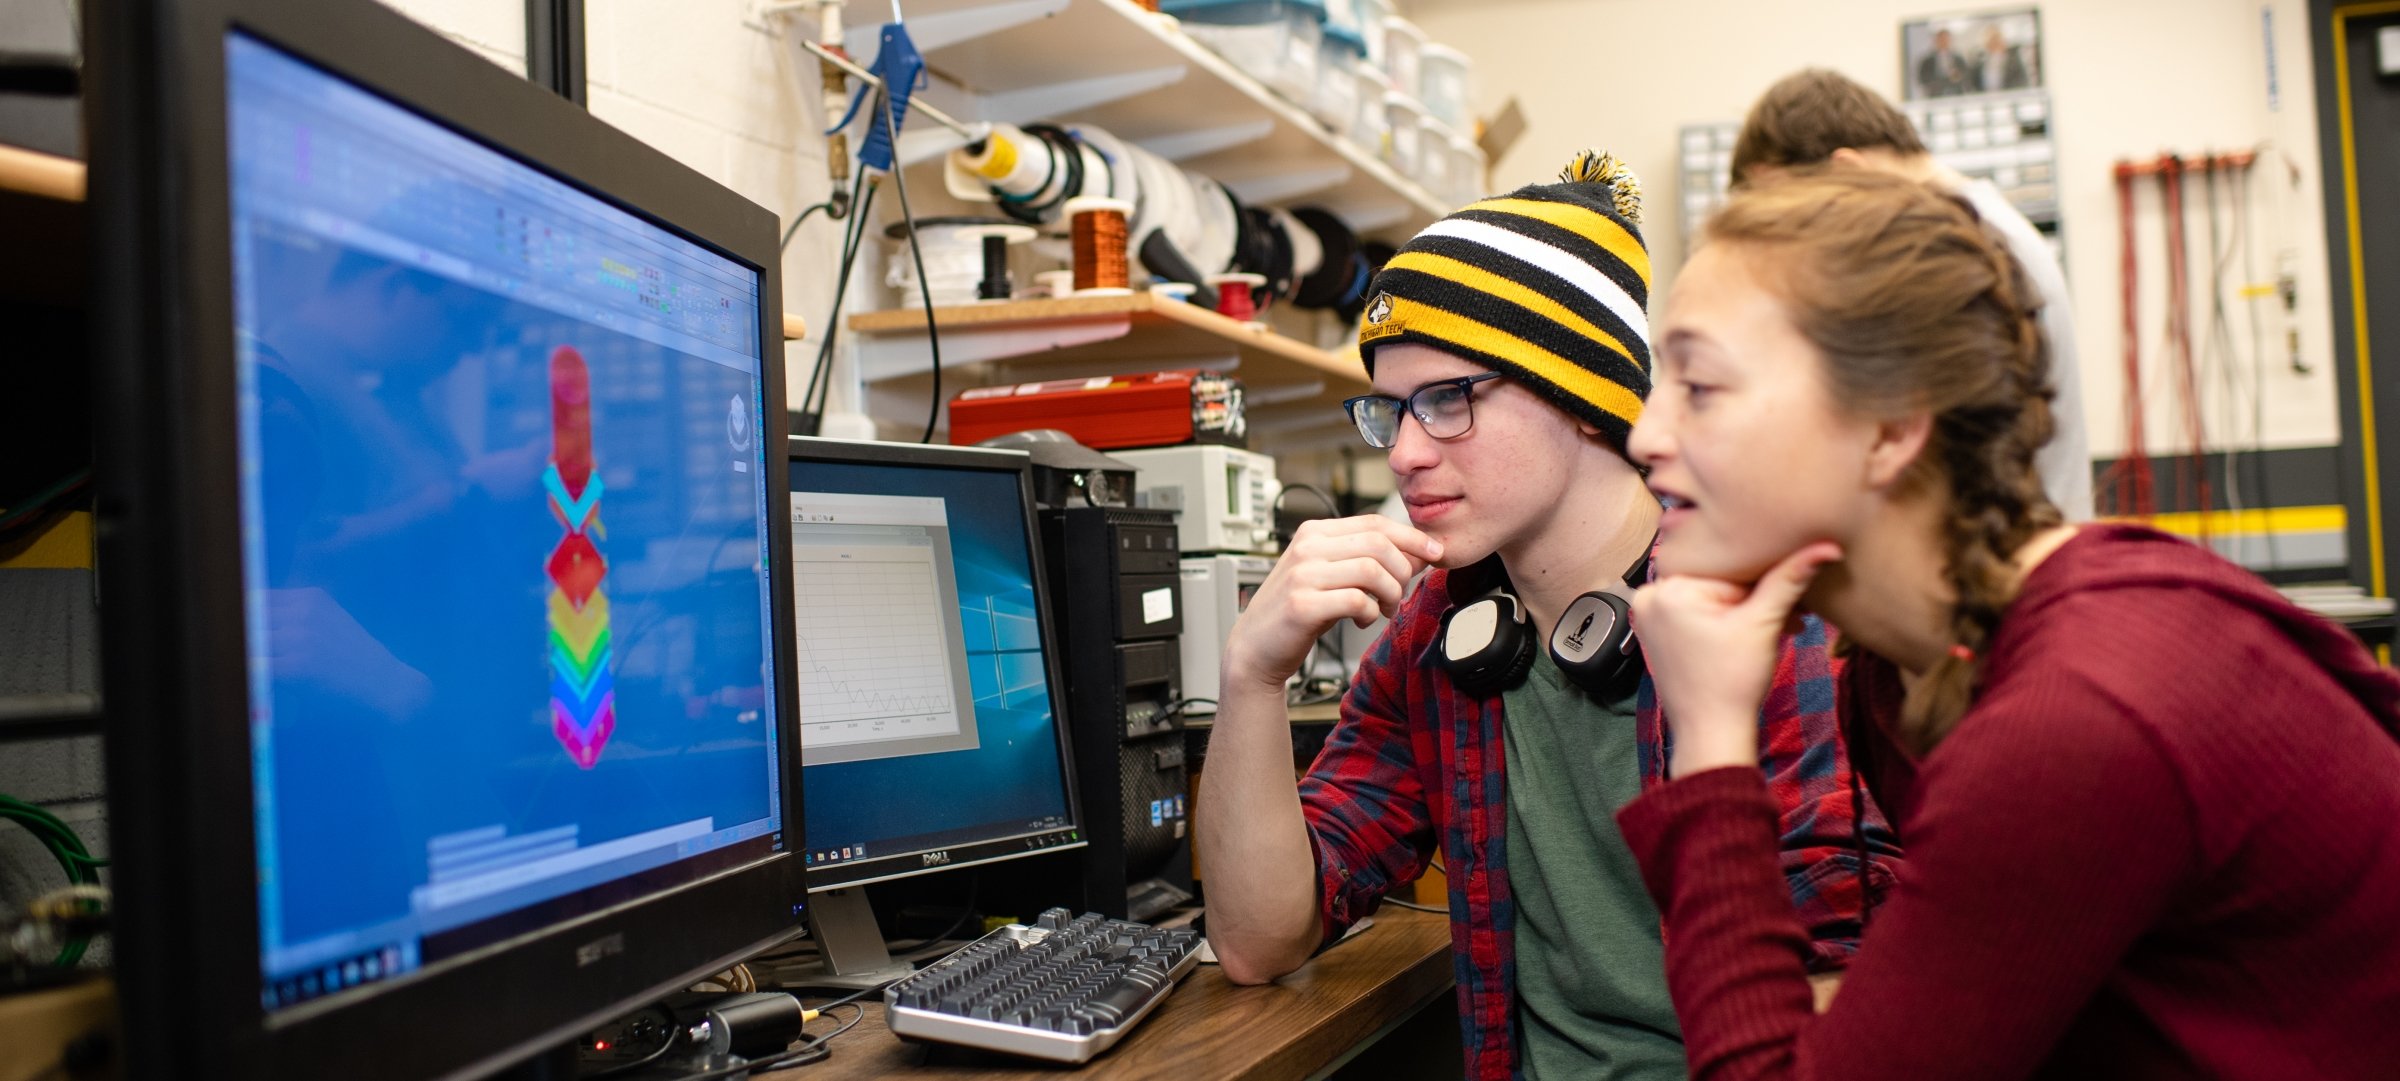 Two students looking at a model on a computer screen.